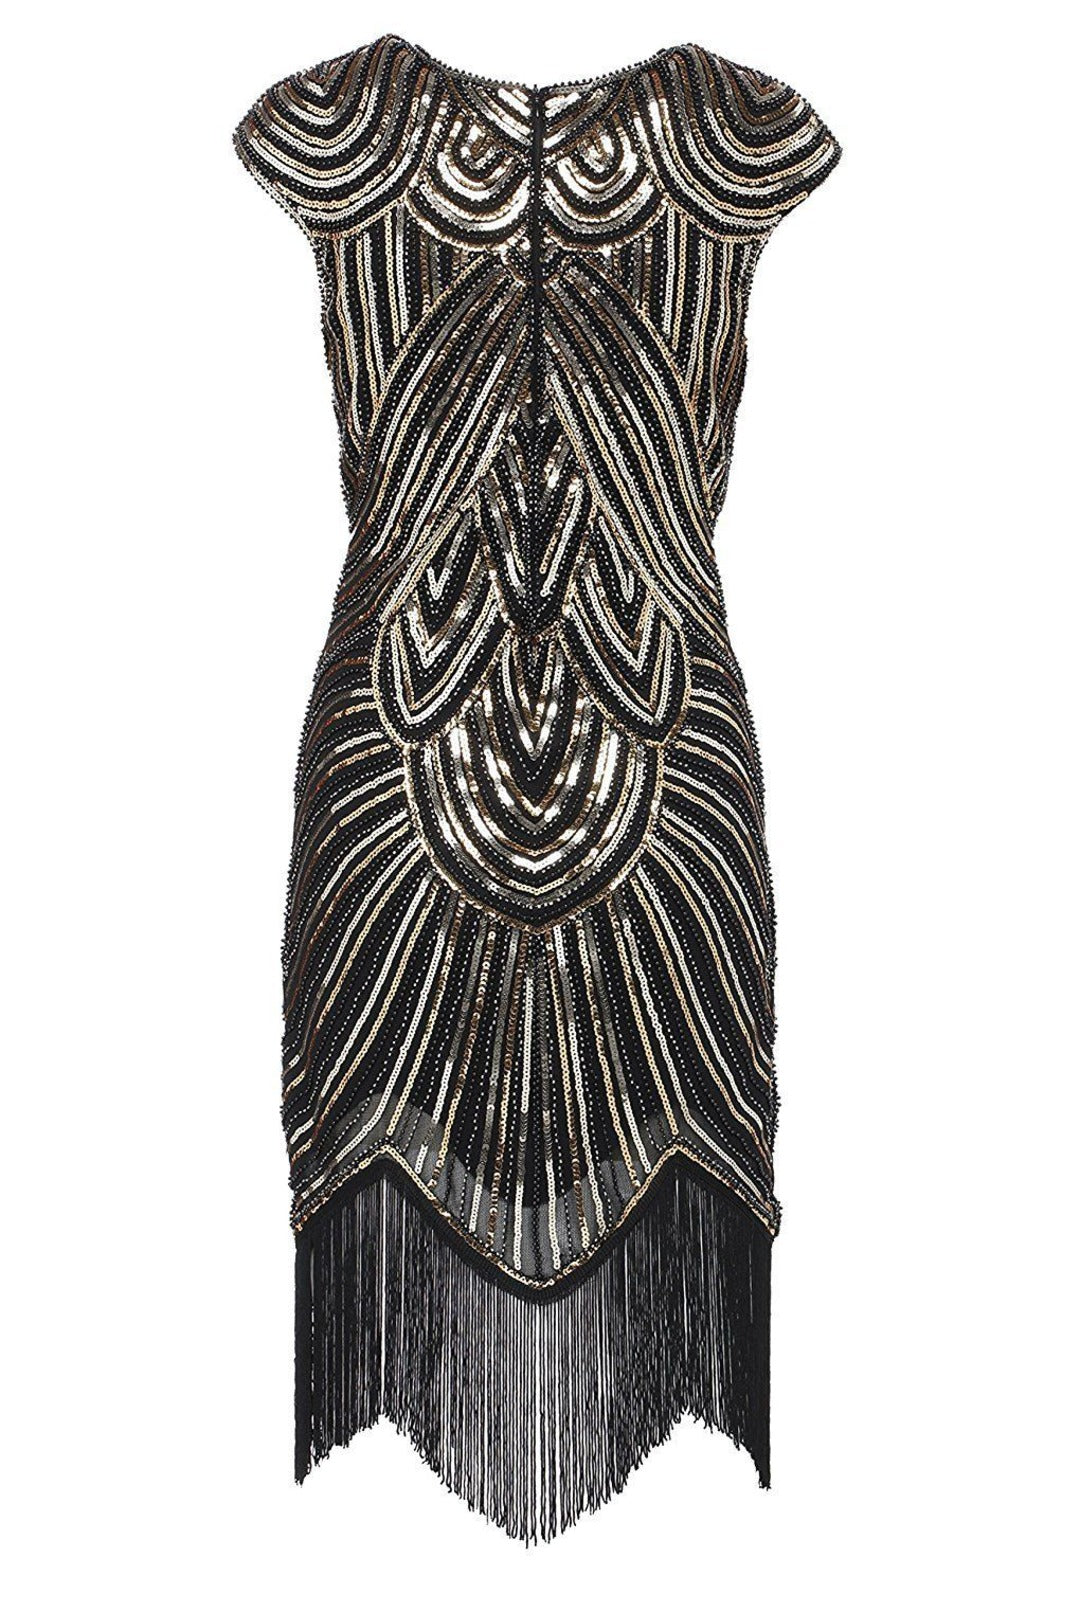 Black and Gold Beaded Cap Sleeve Great Gatsby Dress